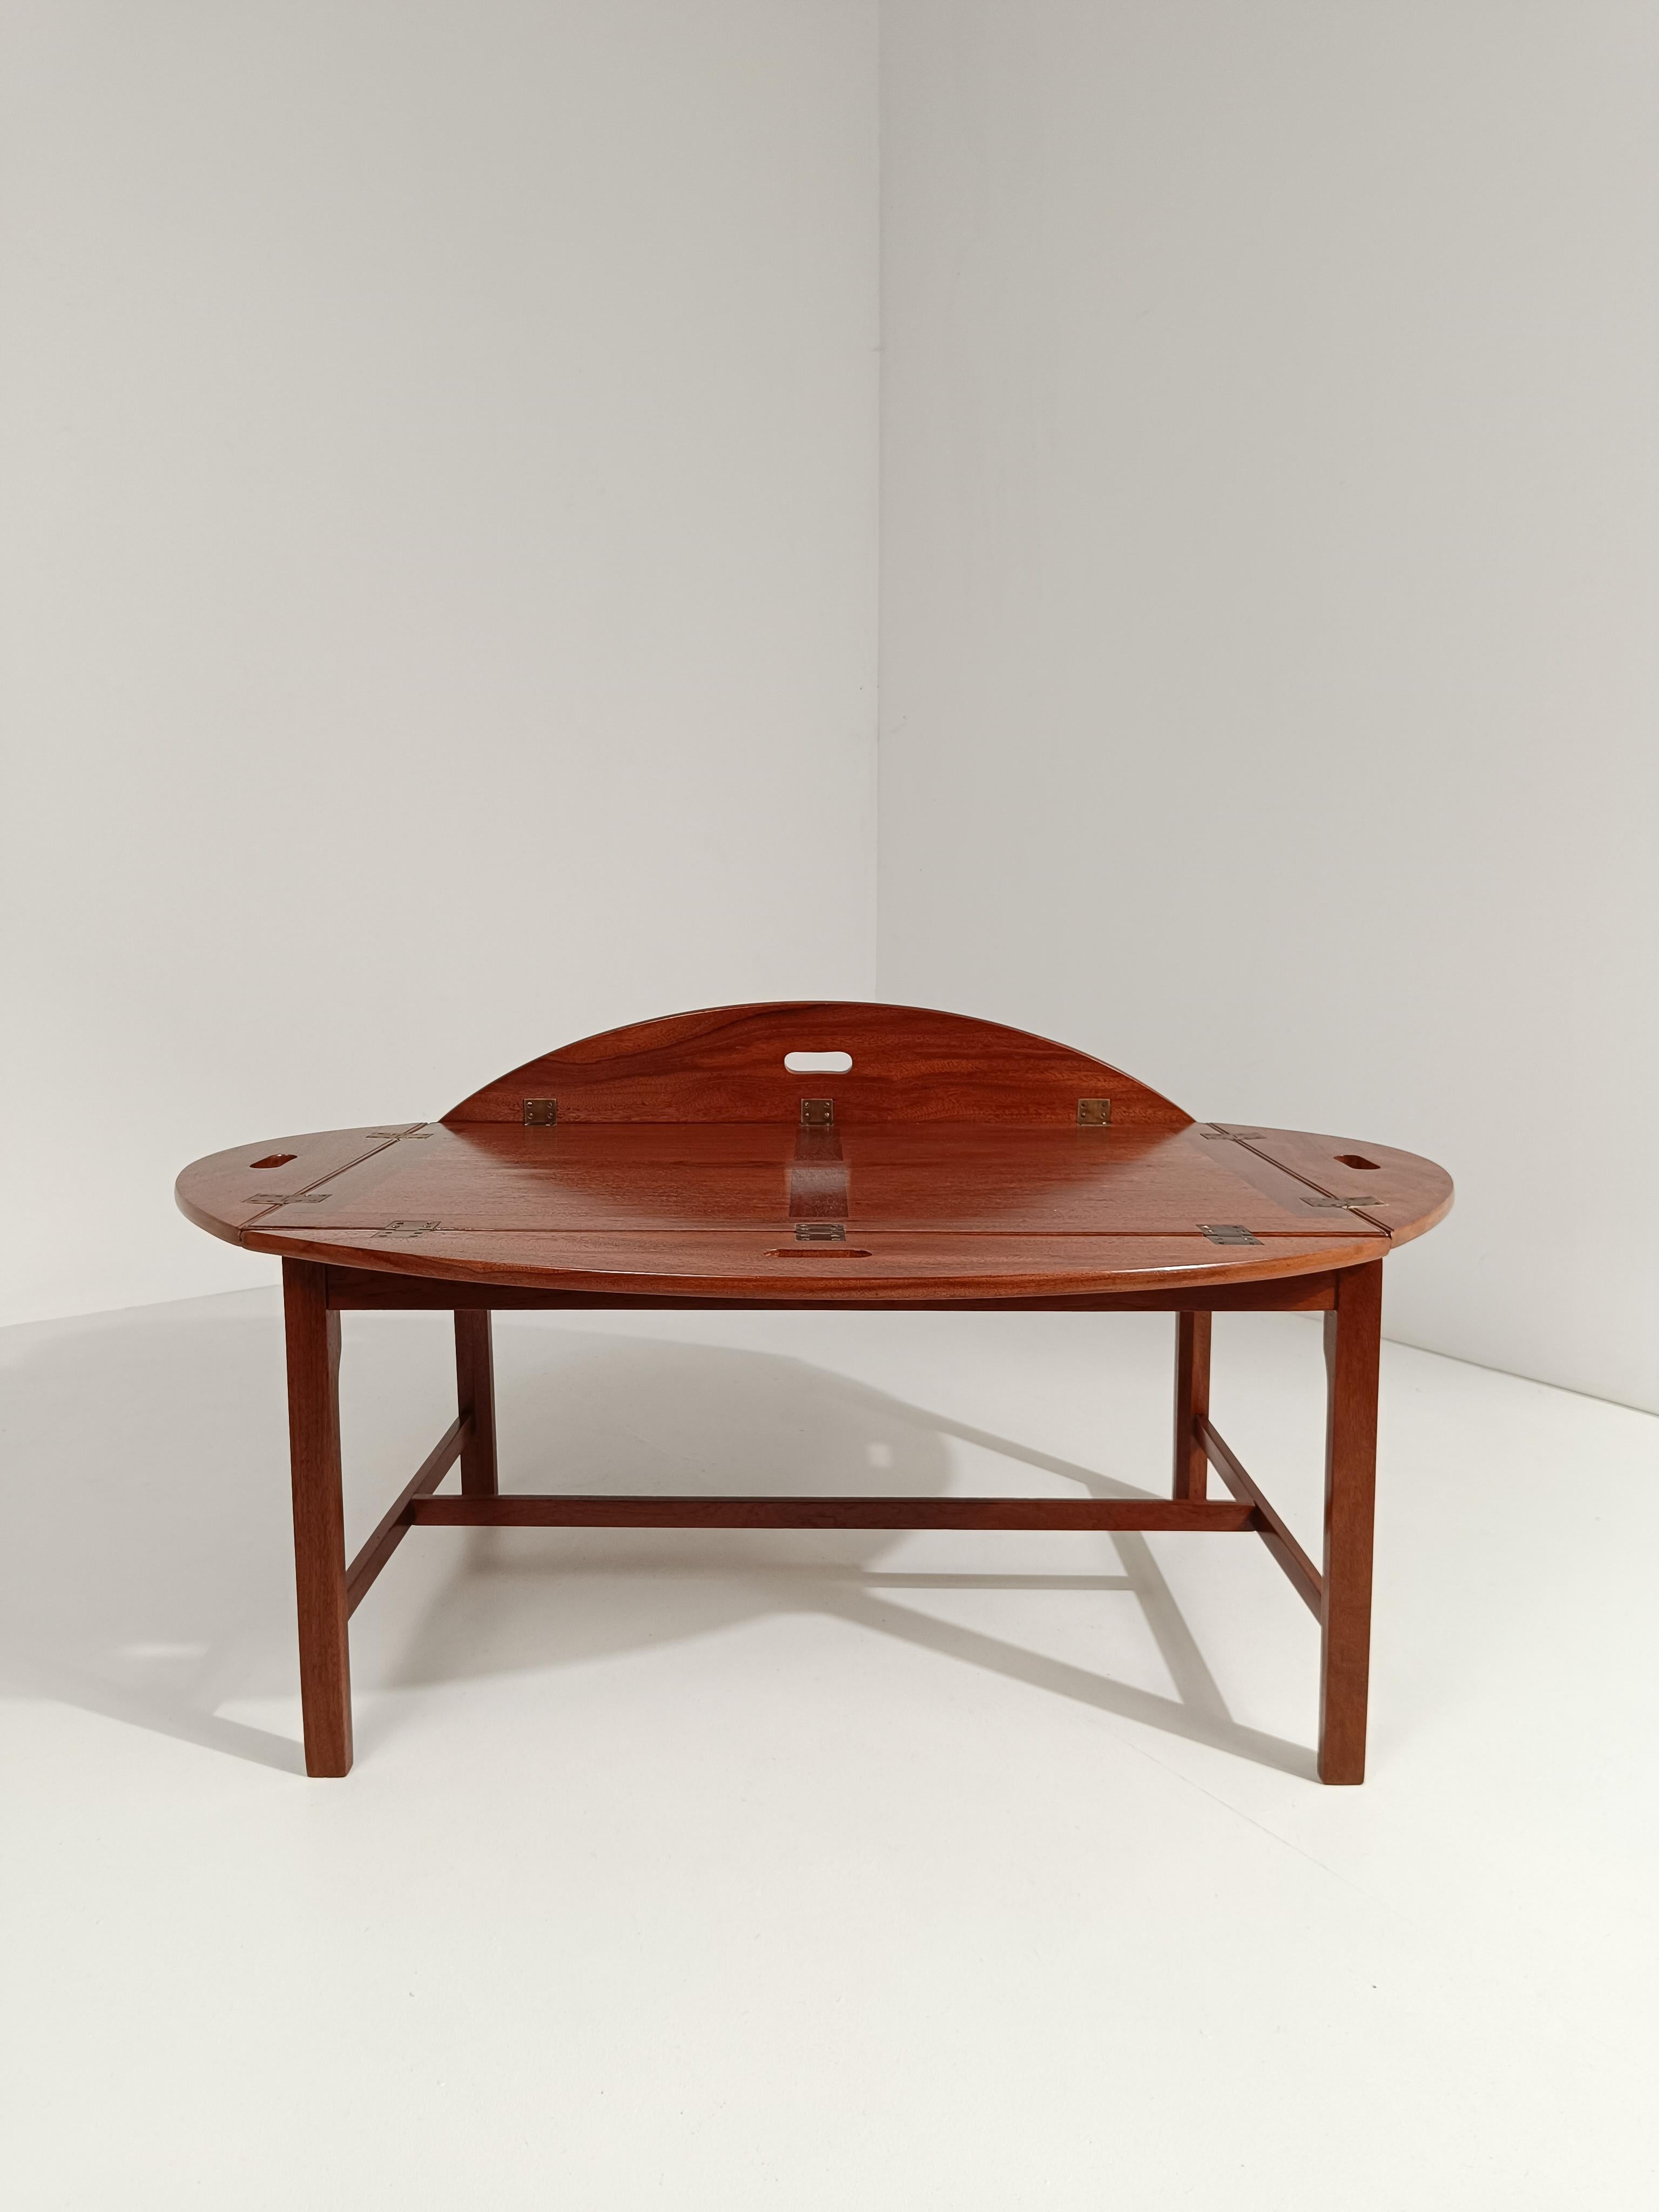 Vintage Oval Mahogany Butler's Coffee Tray Table in Georgian-style, Circa 1960s For Sale 2